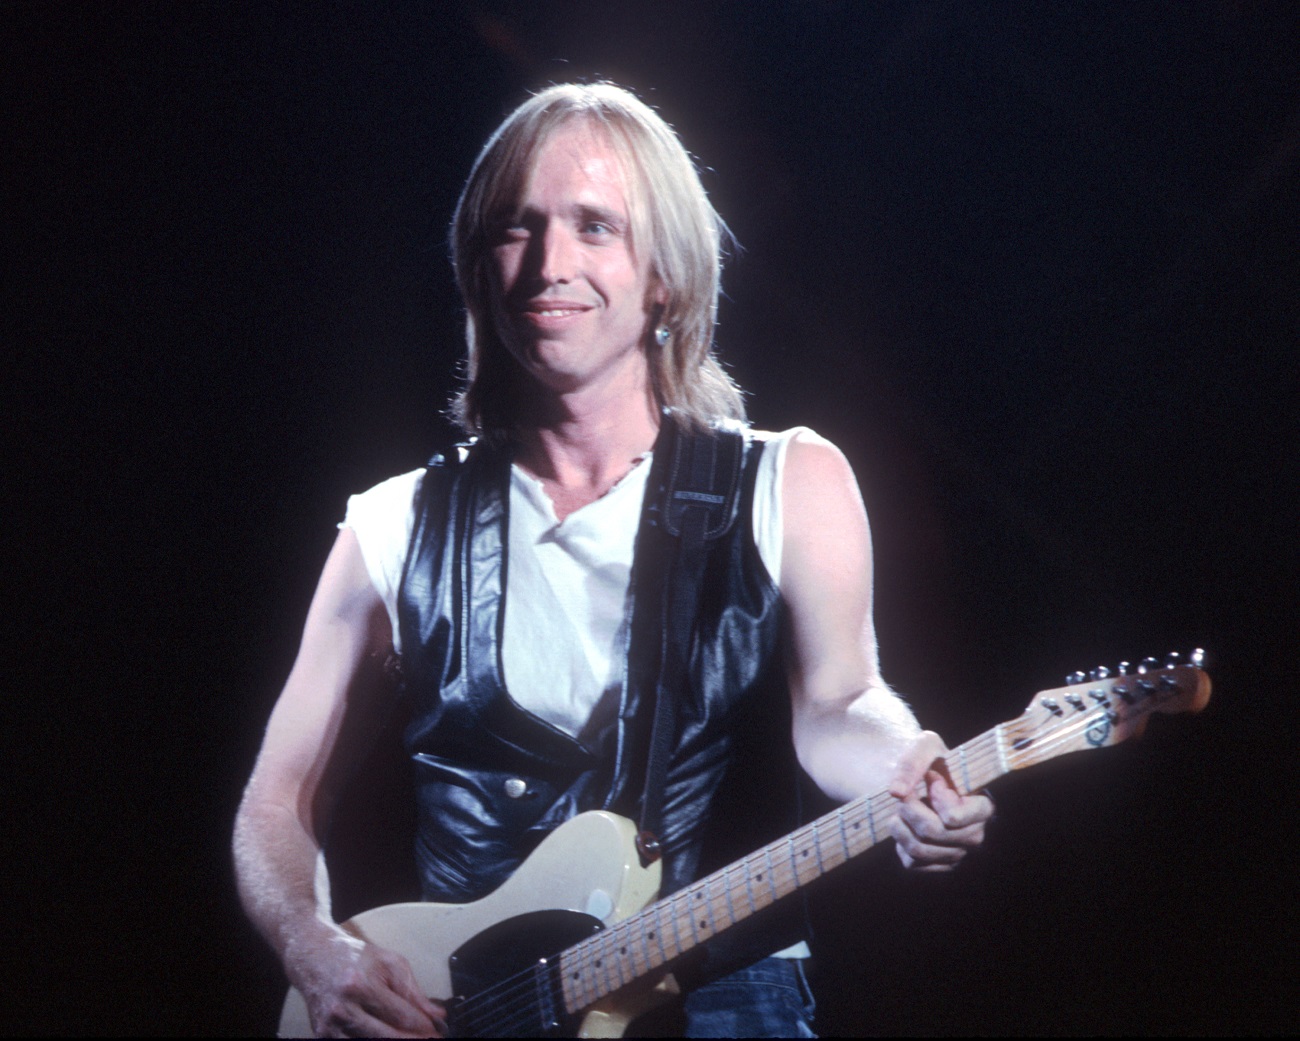 Tom Petty wears a white tank top and black vest and plays the guitar.